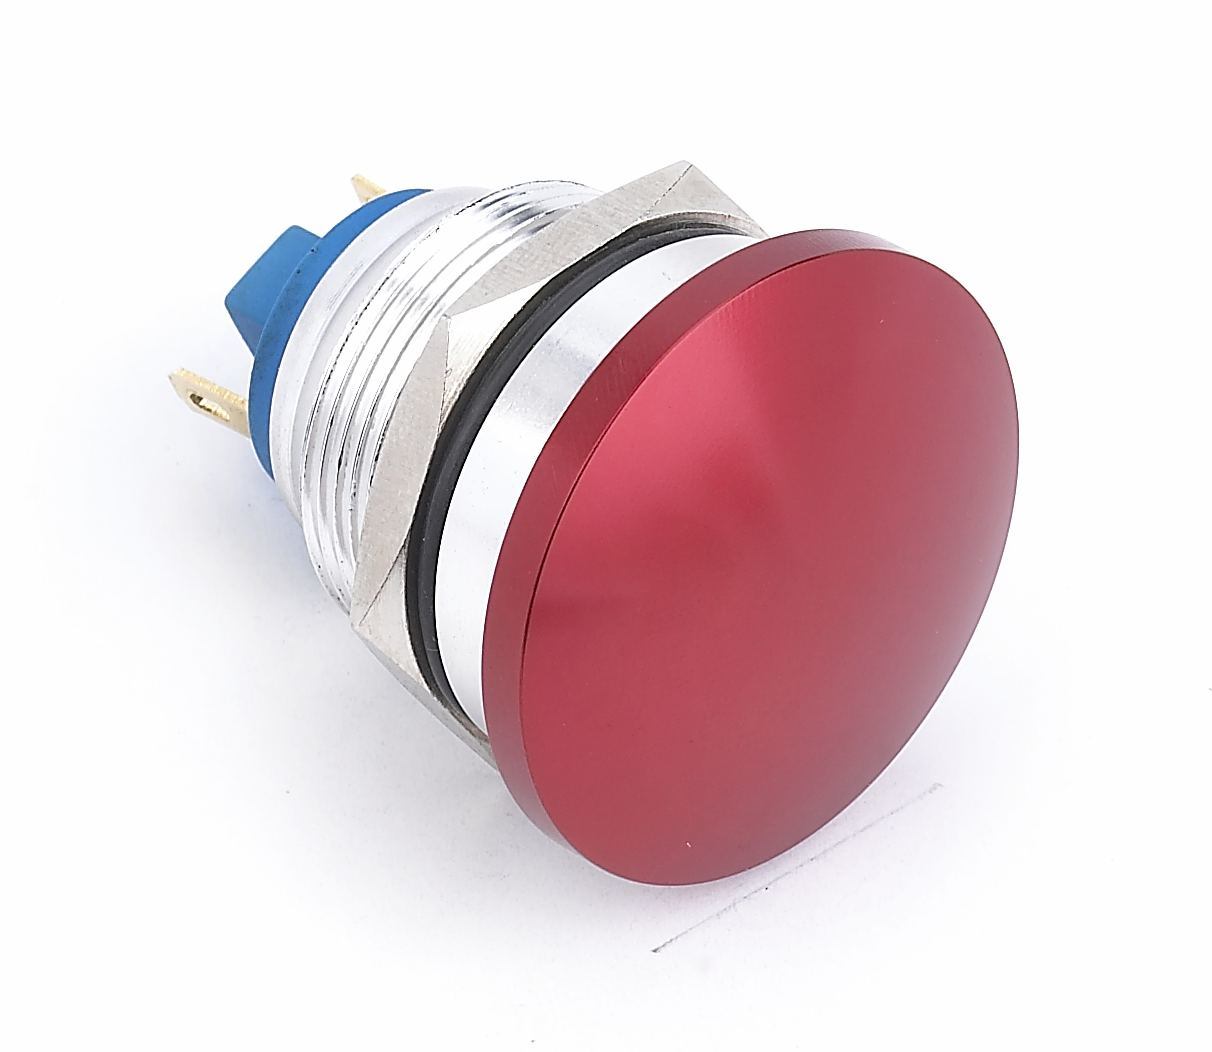 22mm IP65 Dpdt Waterproof Push Button Switches